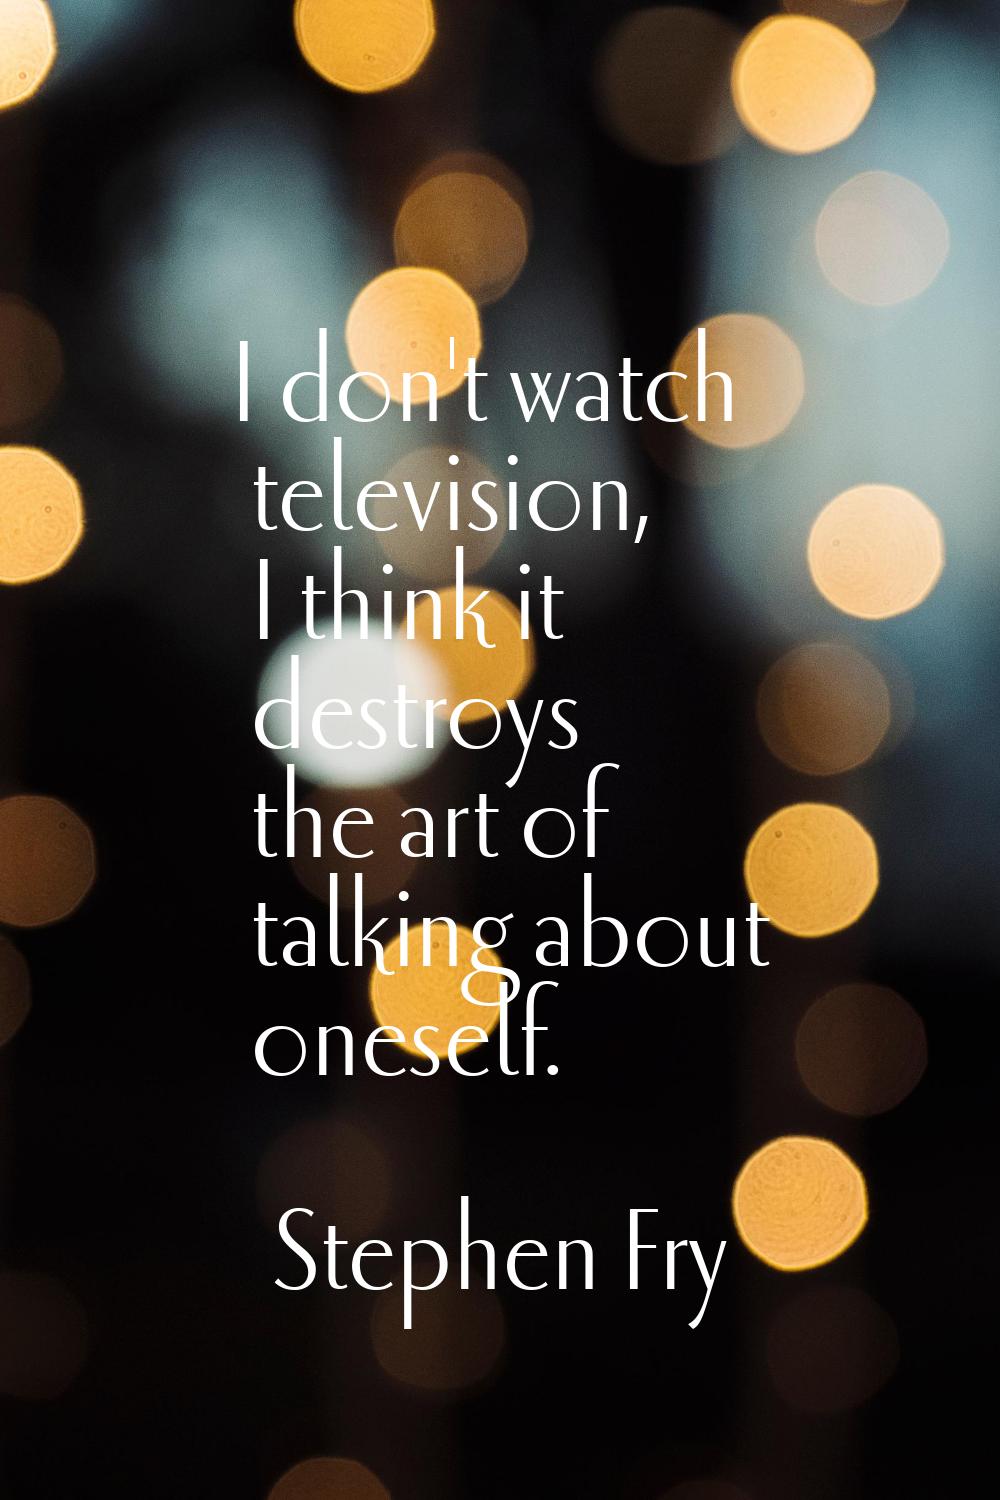 I don't watch television, I think it destroys the art of talking about oneself.